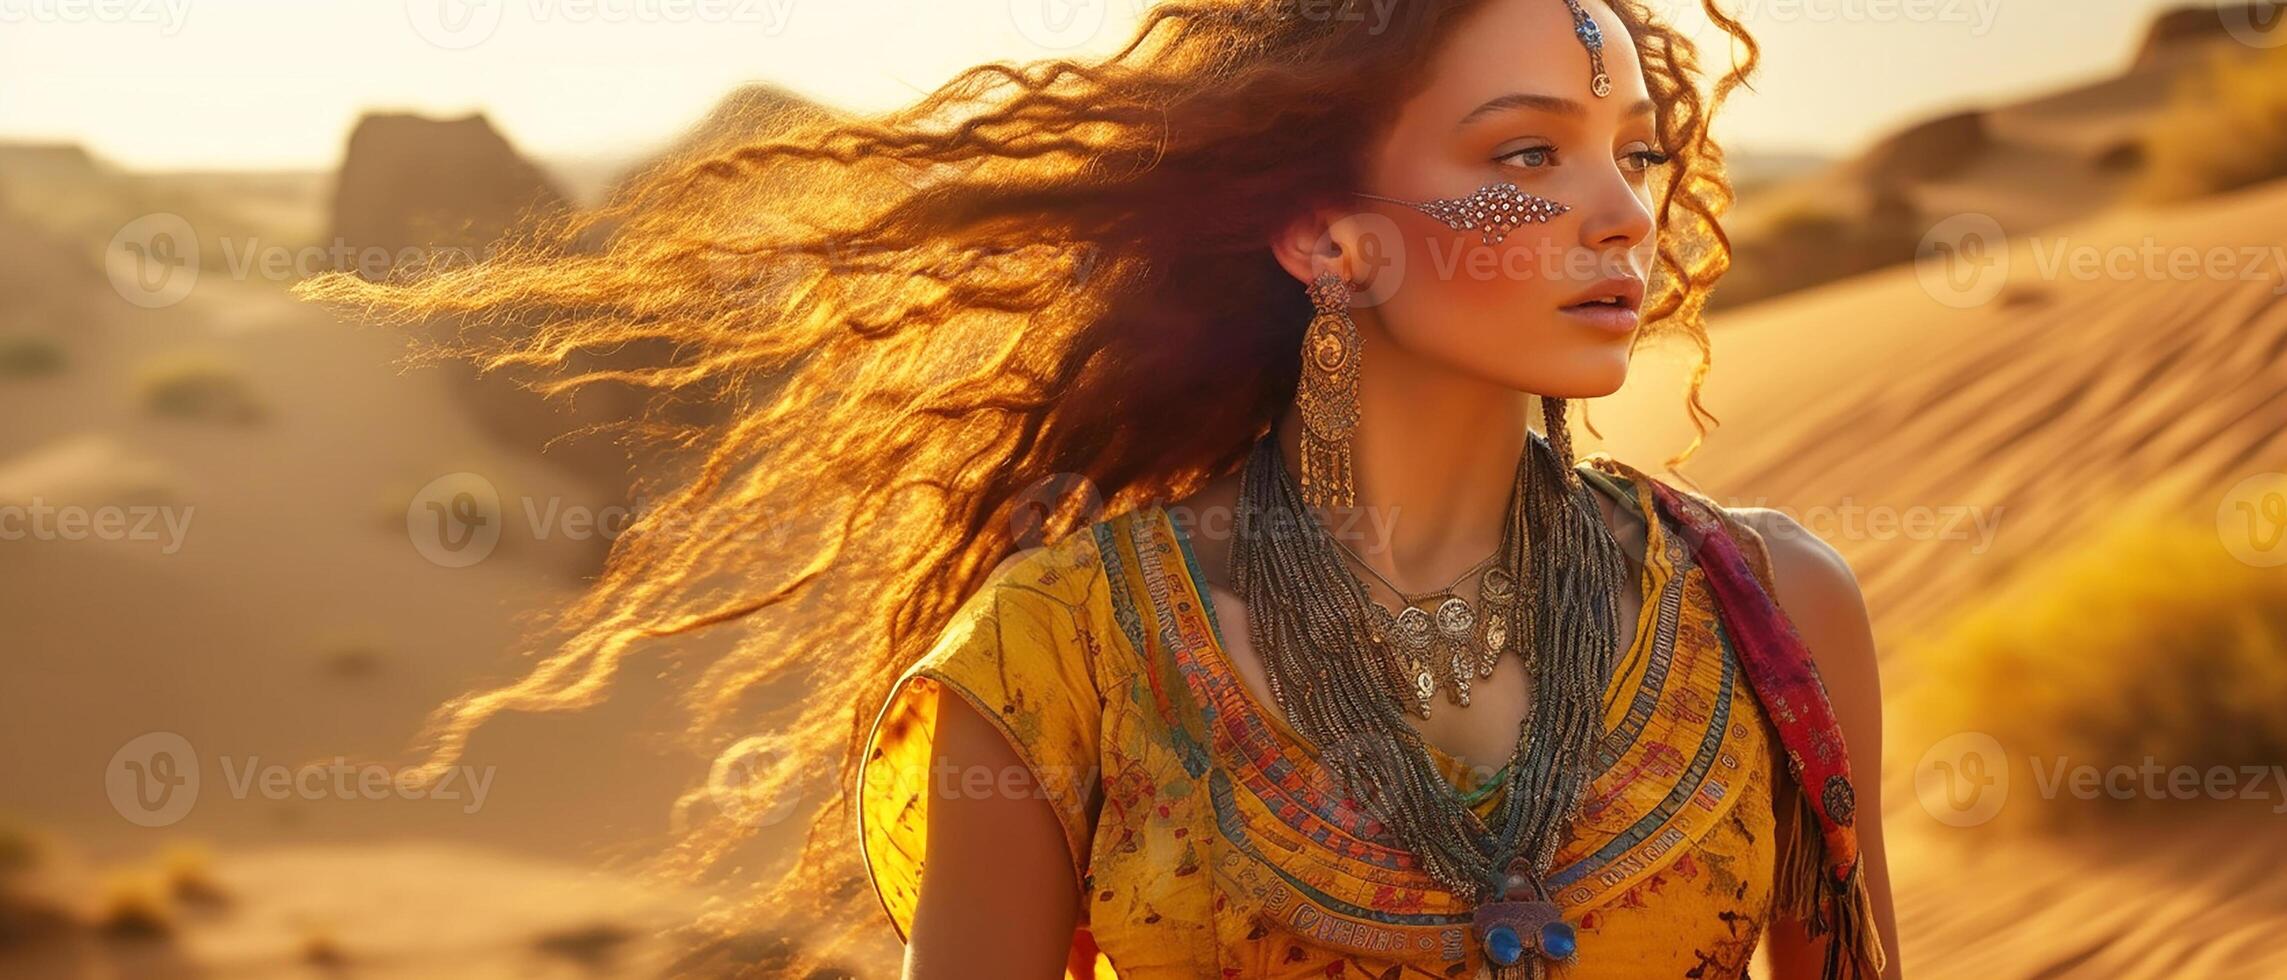 Girl model, Indian girl with red hair, psychedelic yellow desert landscape background. photo